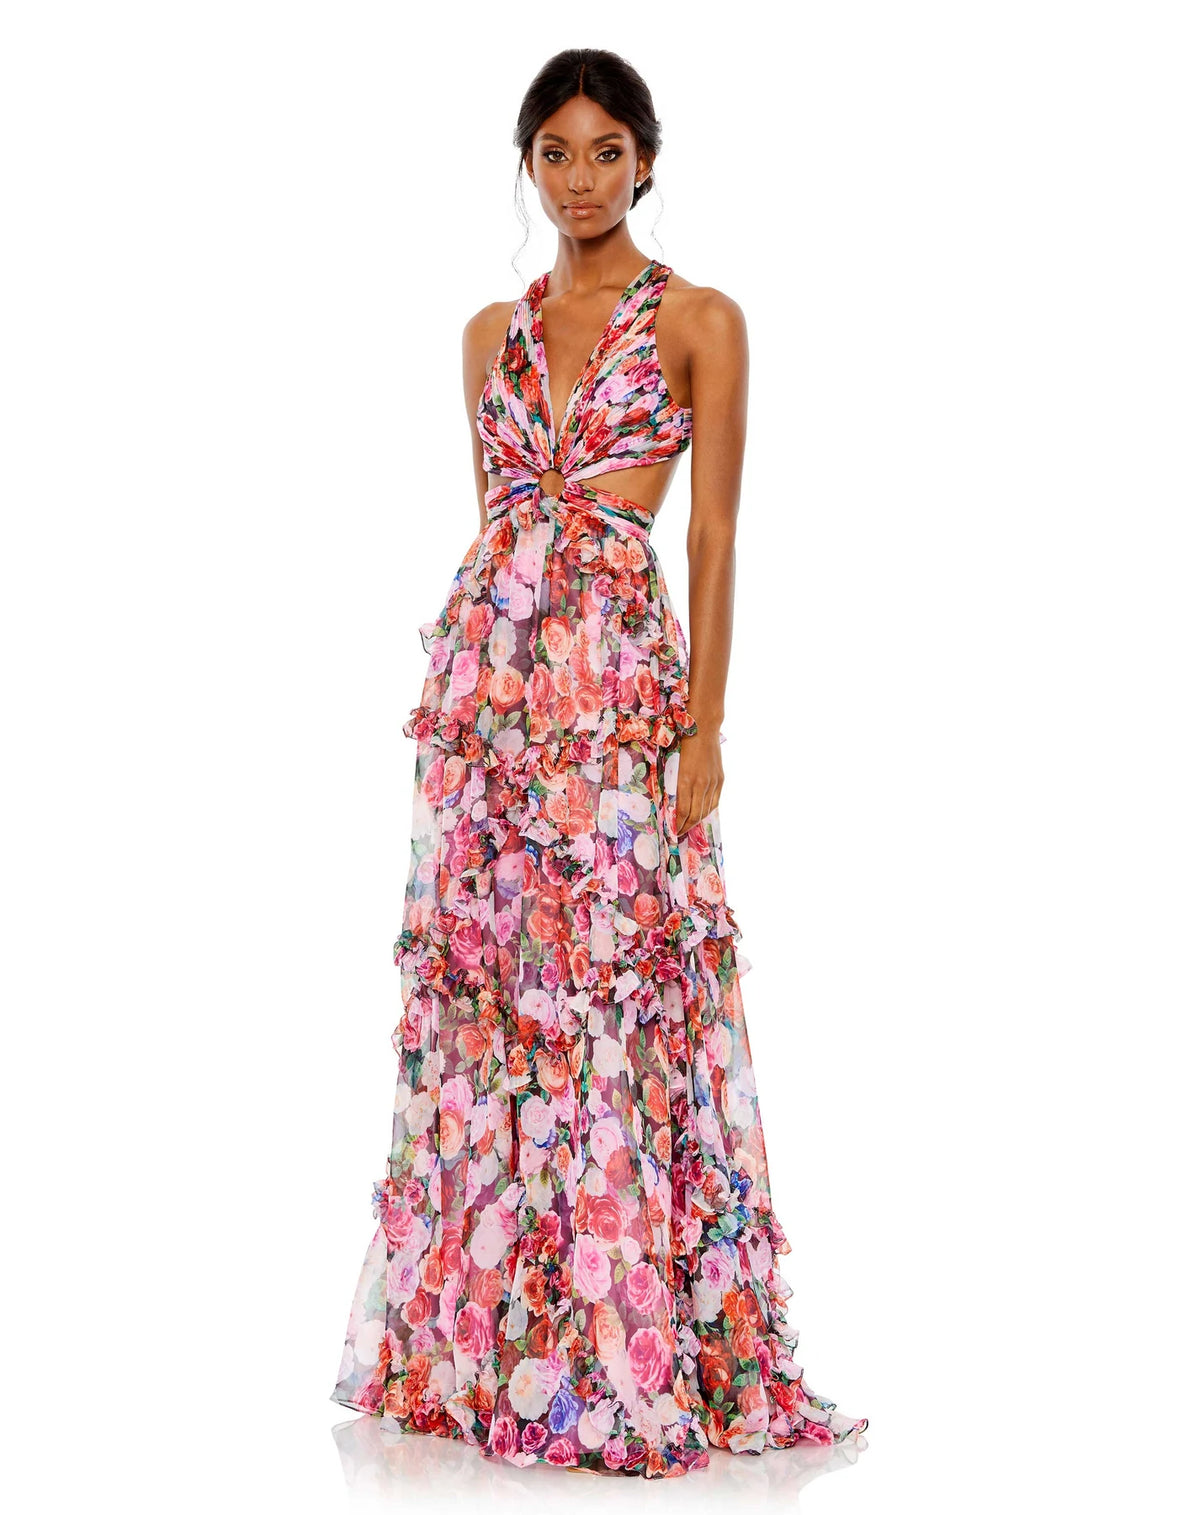 This elegant Mac Duggal, long, short-sleeved, ruffled, multi, tiered dress is perfect for Summer proms and wedding guests! This dress with short ruffled sleeves and a sexy cut-out detail make it so very stunning! Inspired by colourful floral blooms, this dress is crafted from translucent chiffon populated with romantic roses. 